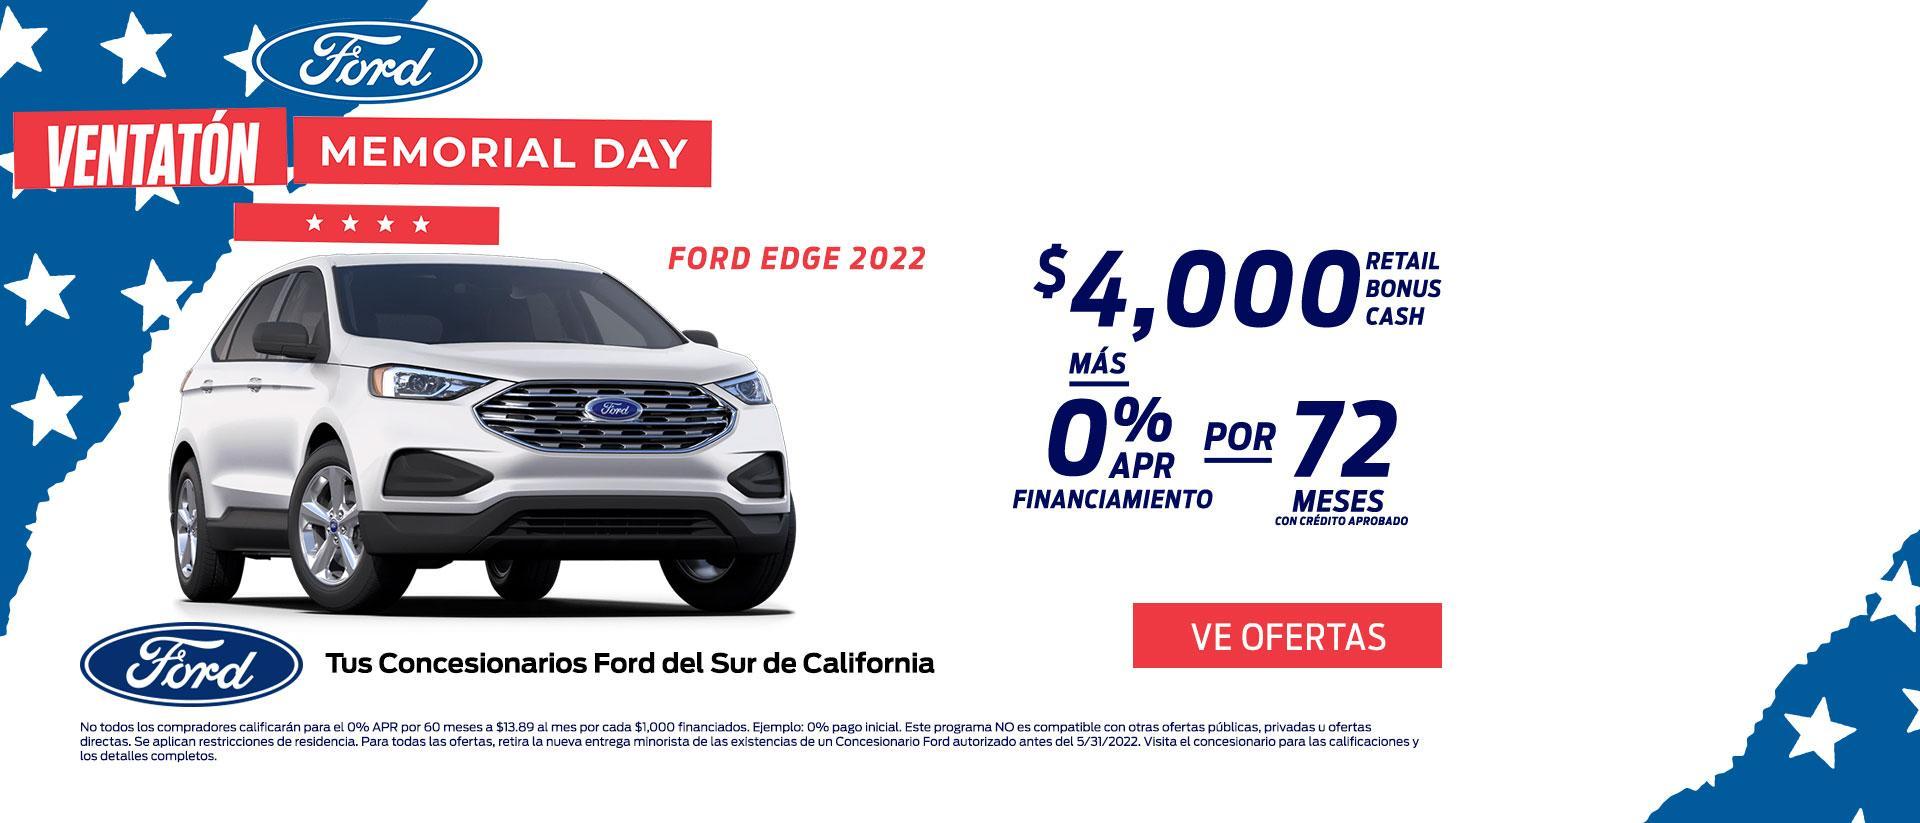 Ford Memorial Day Sellathon | 2022 Ford Edge | Southern California Ford Dealers